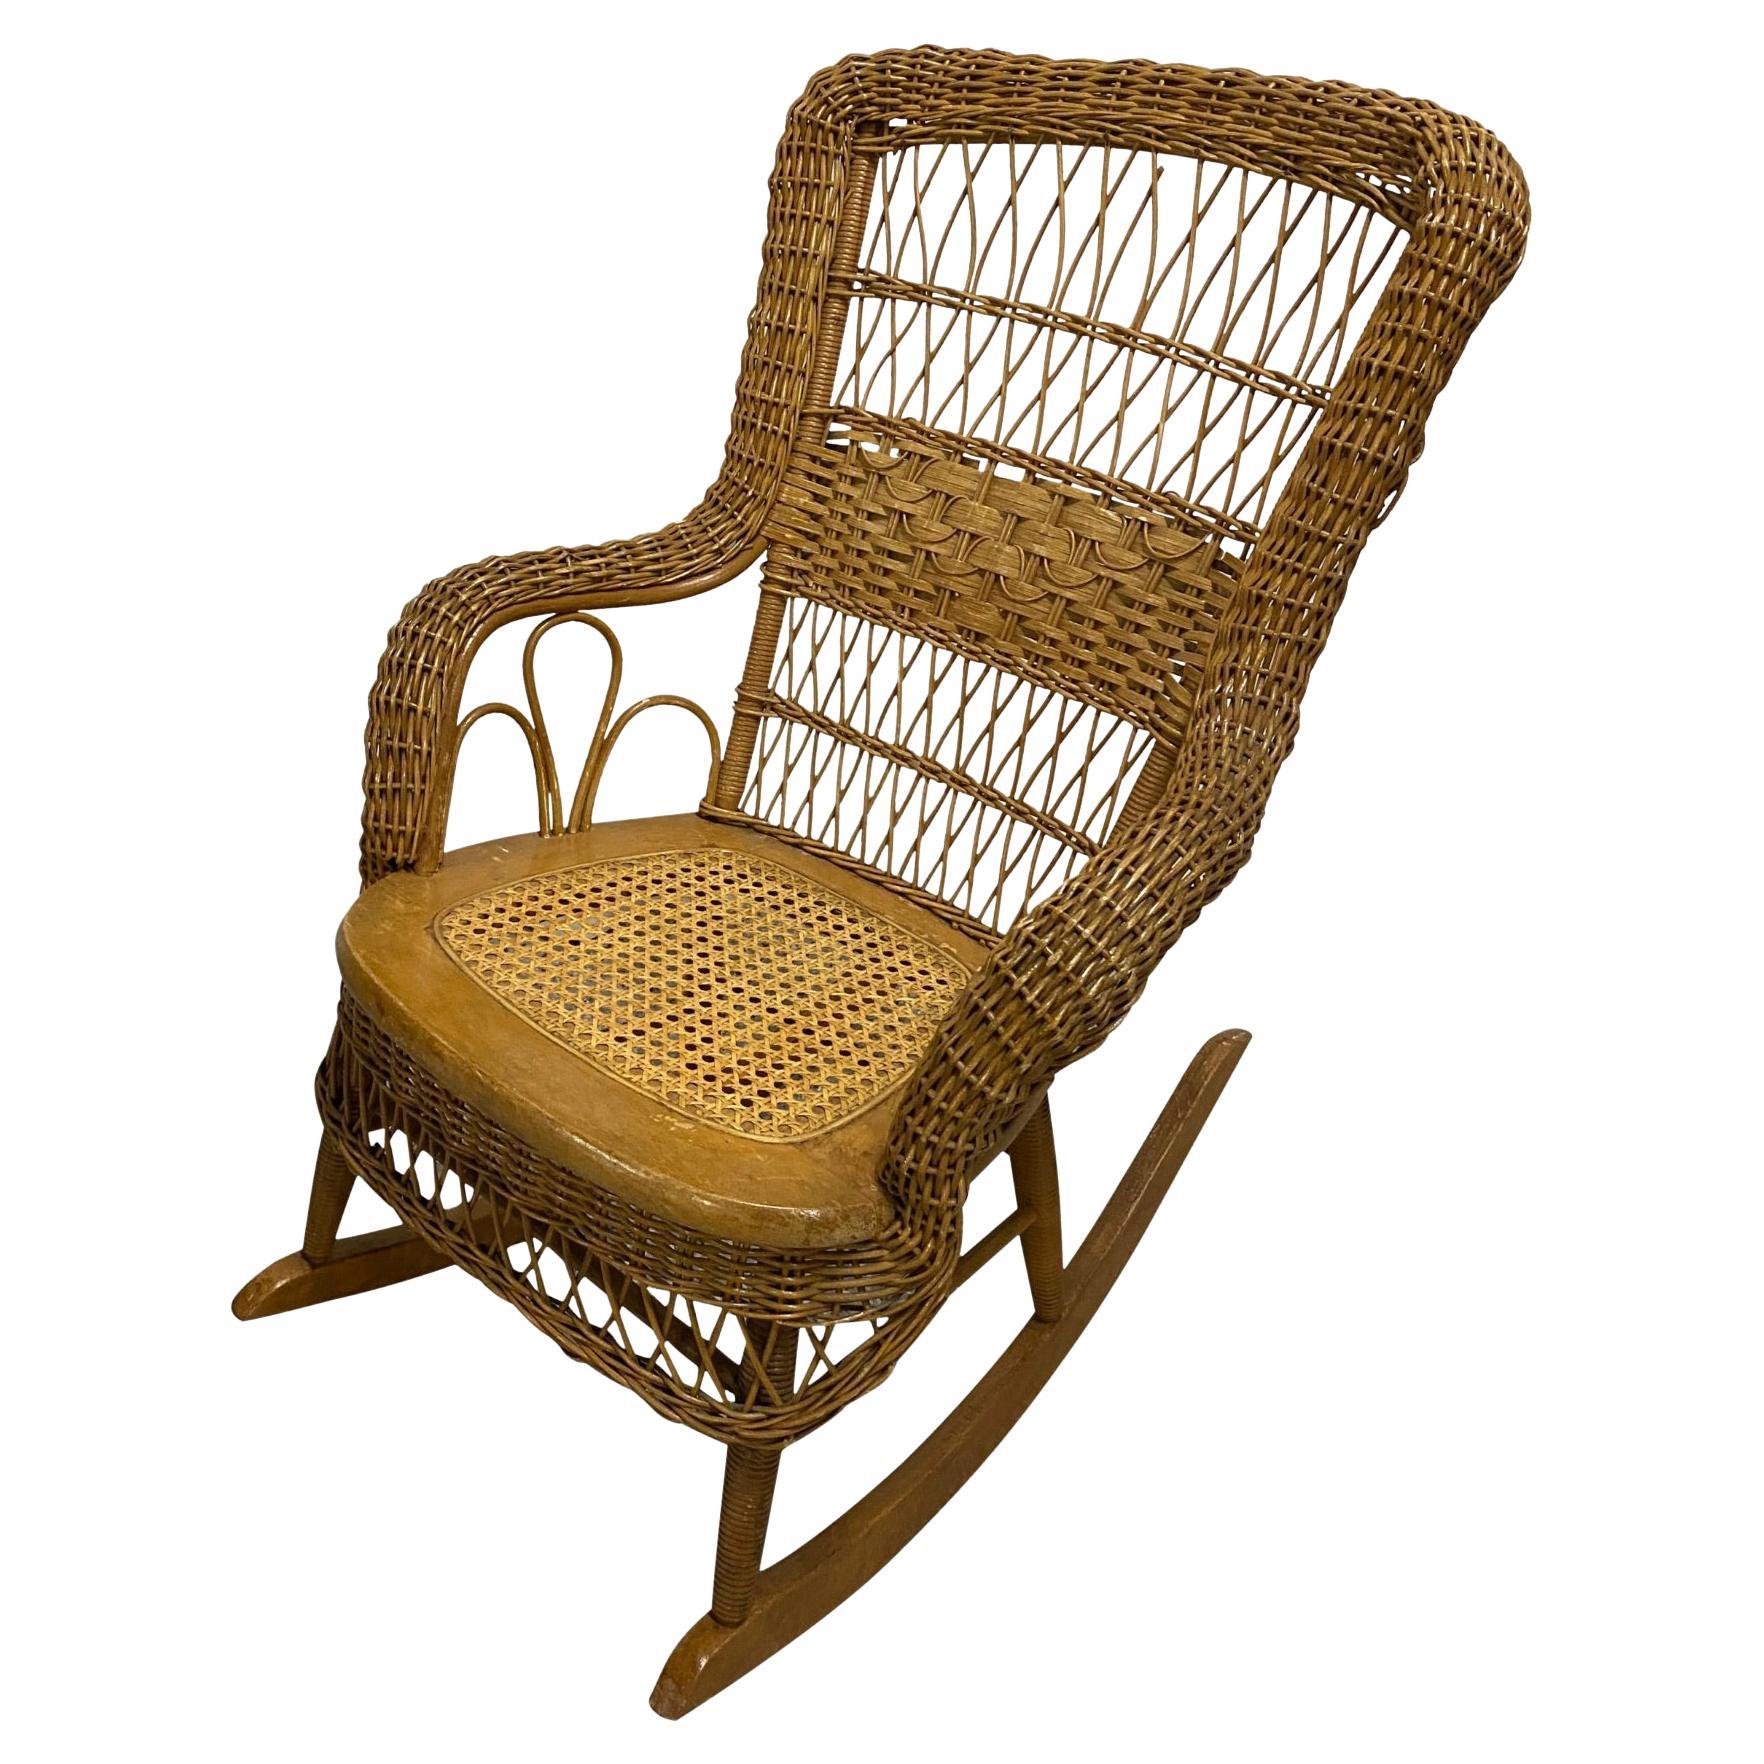 Early 20th Century Rocking Chair with Caned Seat